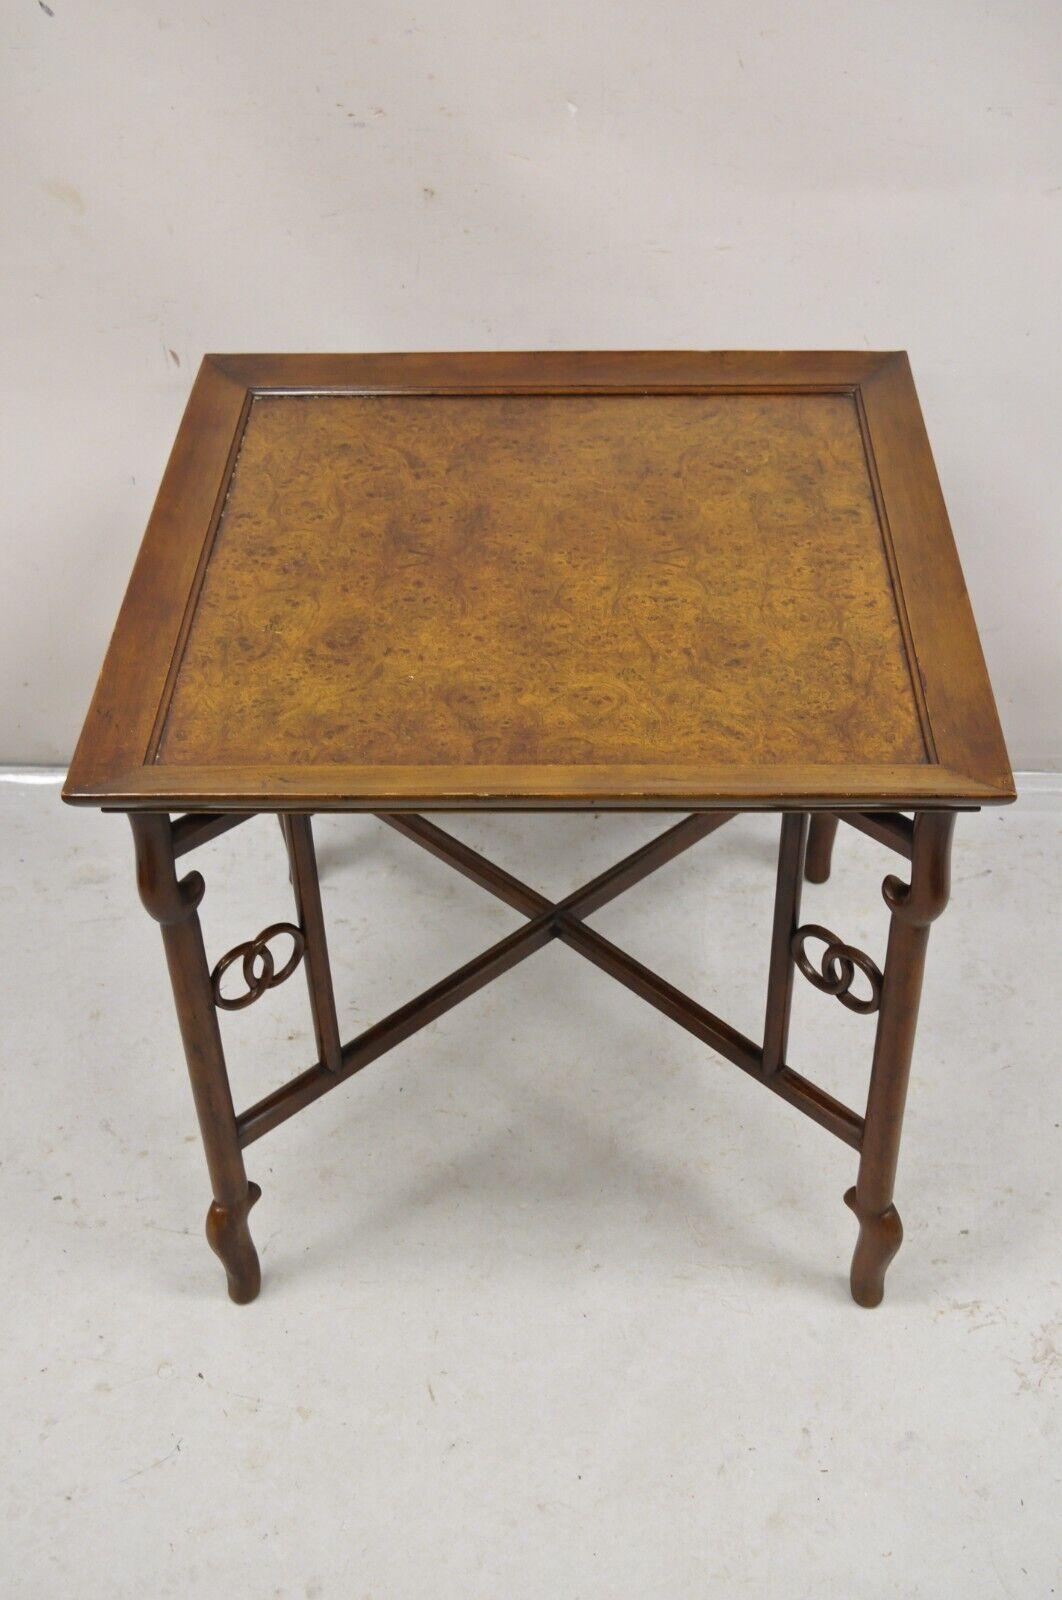 Baker Michael Taylor Far East Collection Asian Burl Wood Square Occasional Side Table. Circa Mid 20th Century. Measurements: 24